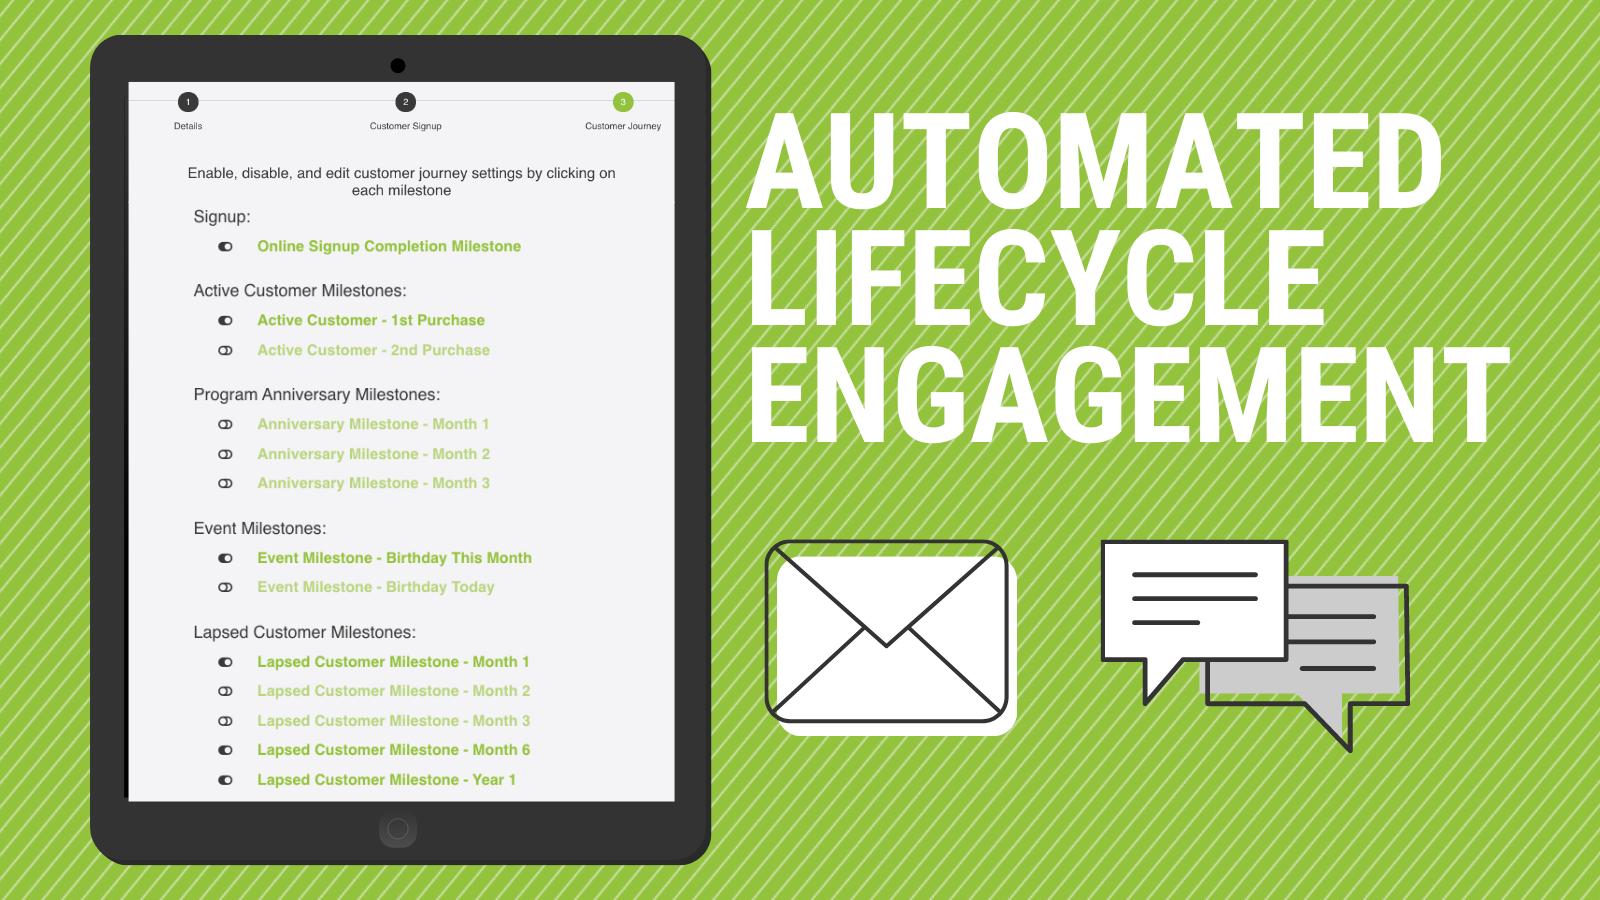 Engage your customers in-store, online, via email or text in real-time during their full lifecycle. Highly engaged customers buy more, promote more, and demonstrate more loyalty.